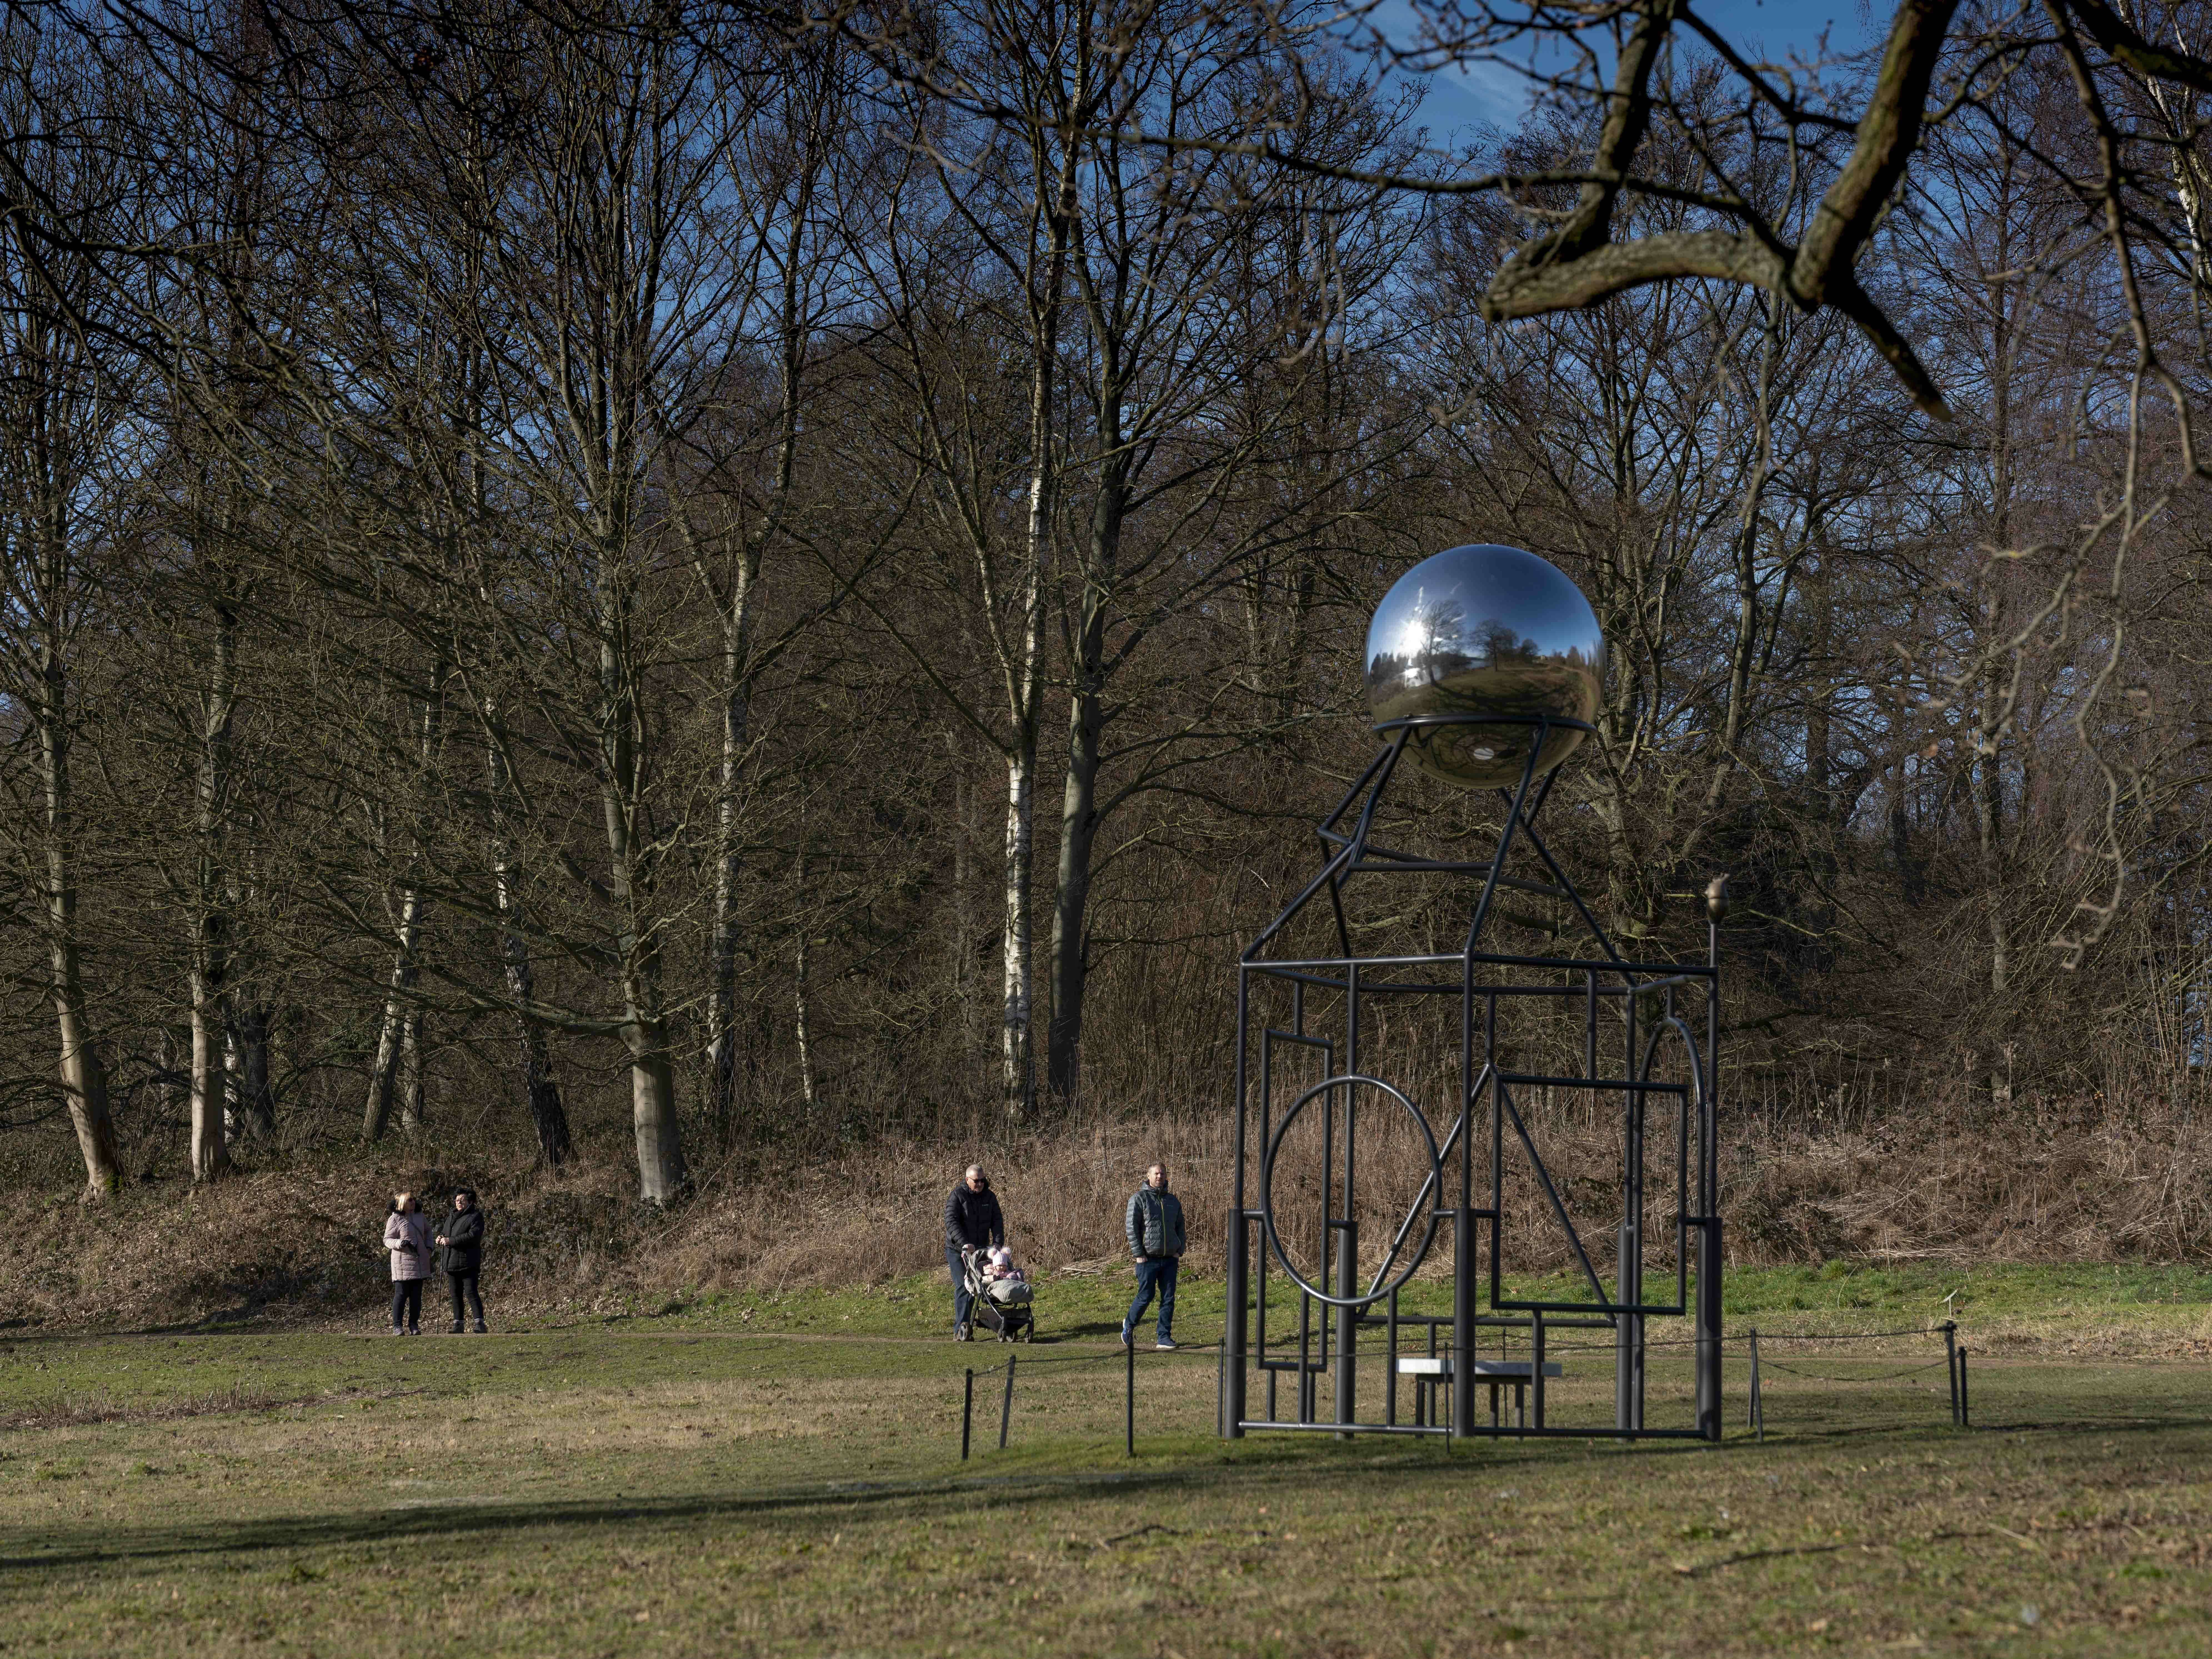 People with a pushchair walking past a metal frame sculpture with a silver ball at the top.